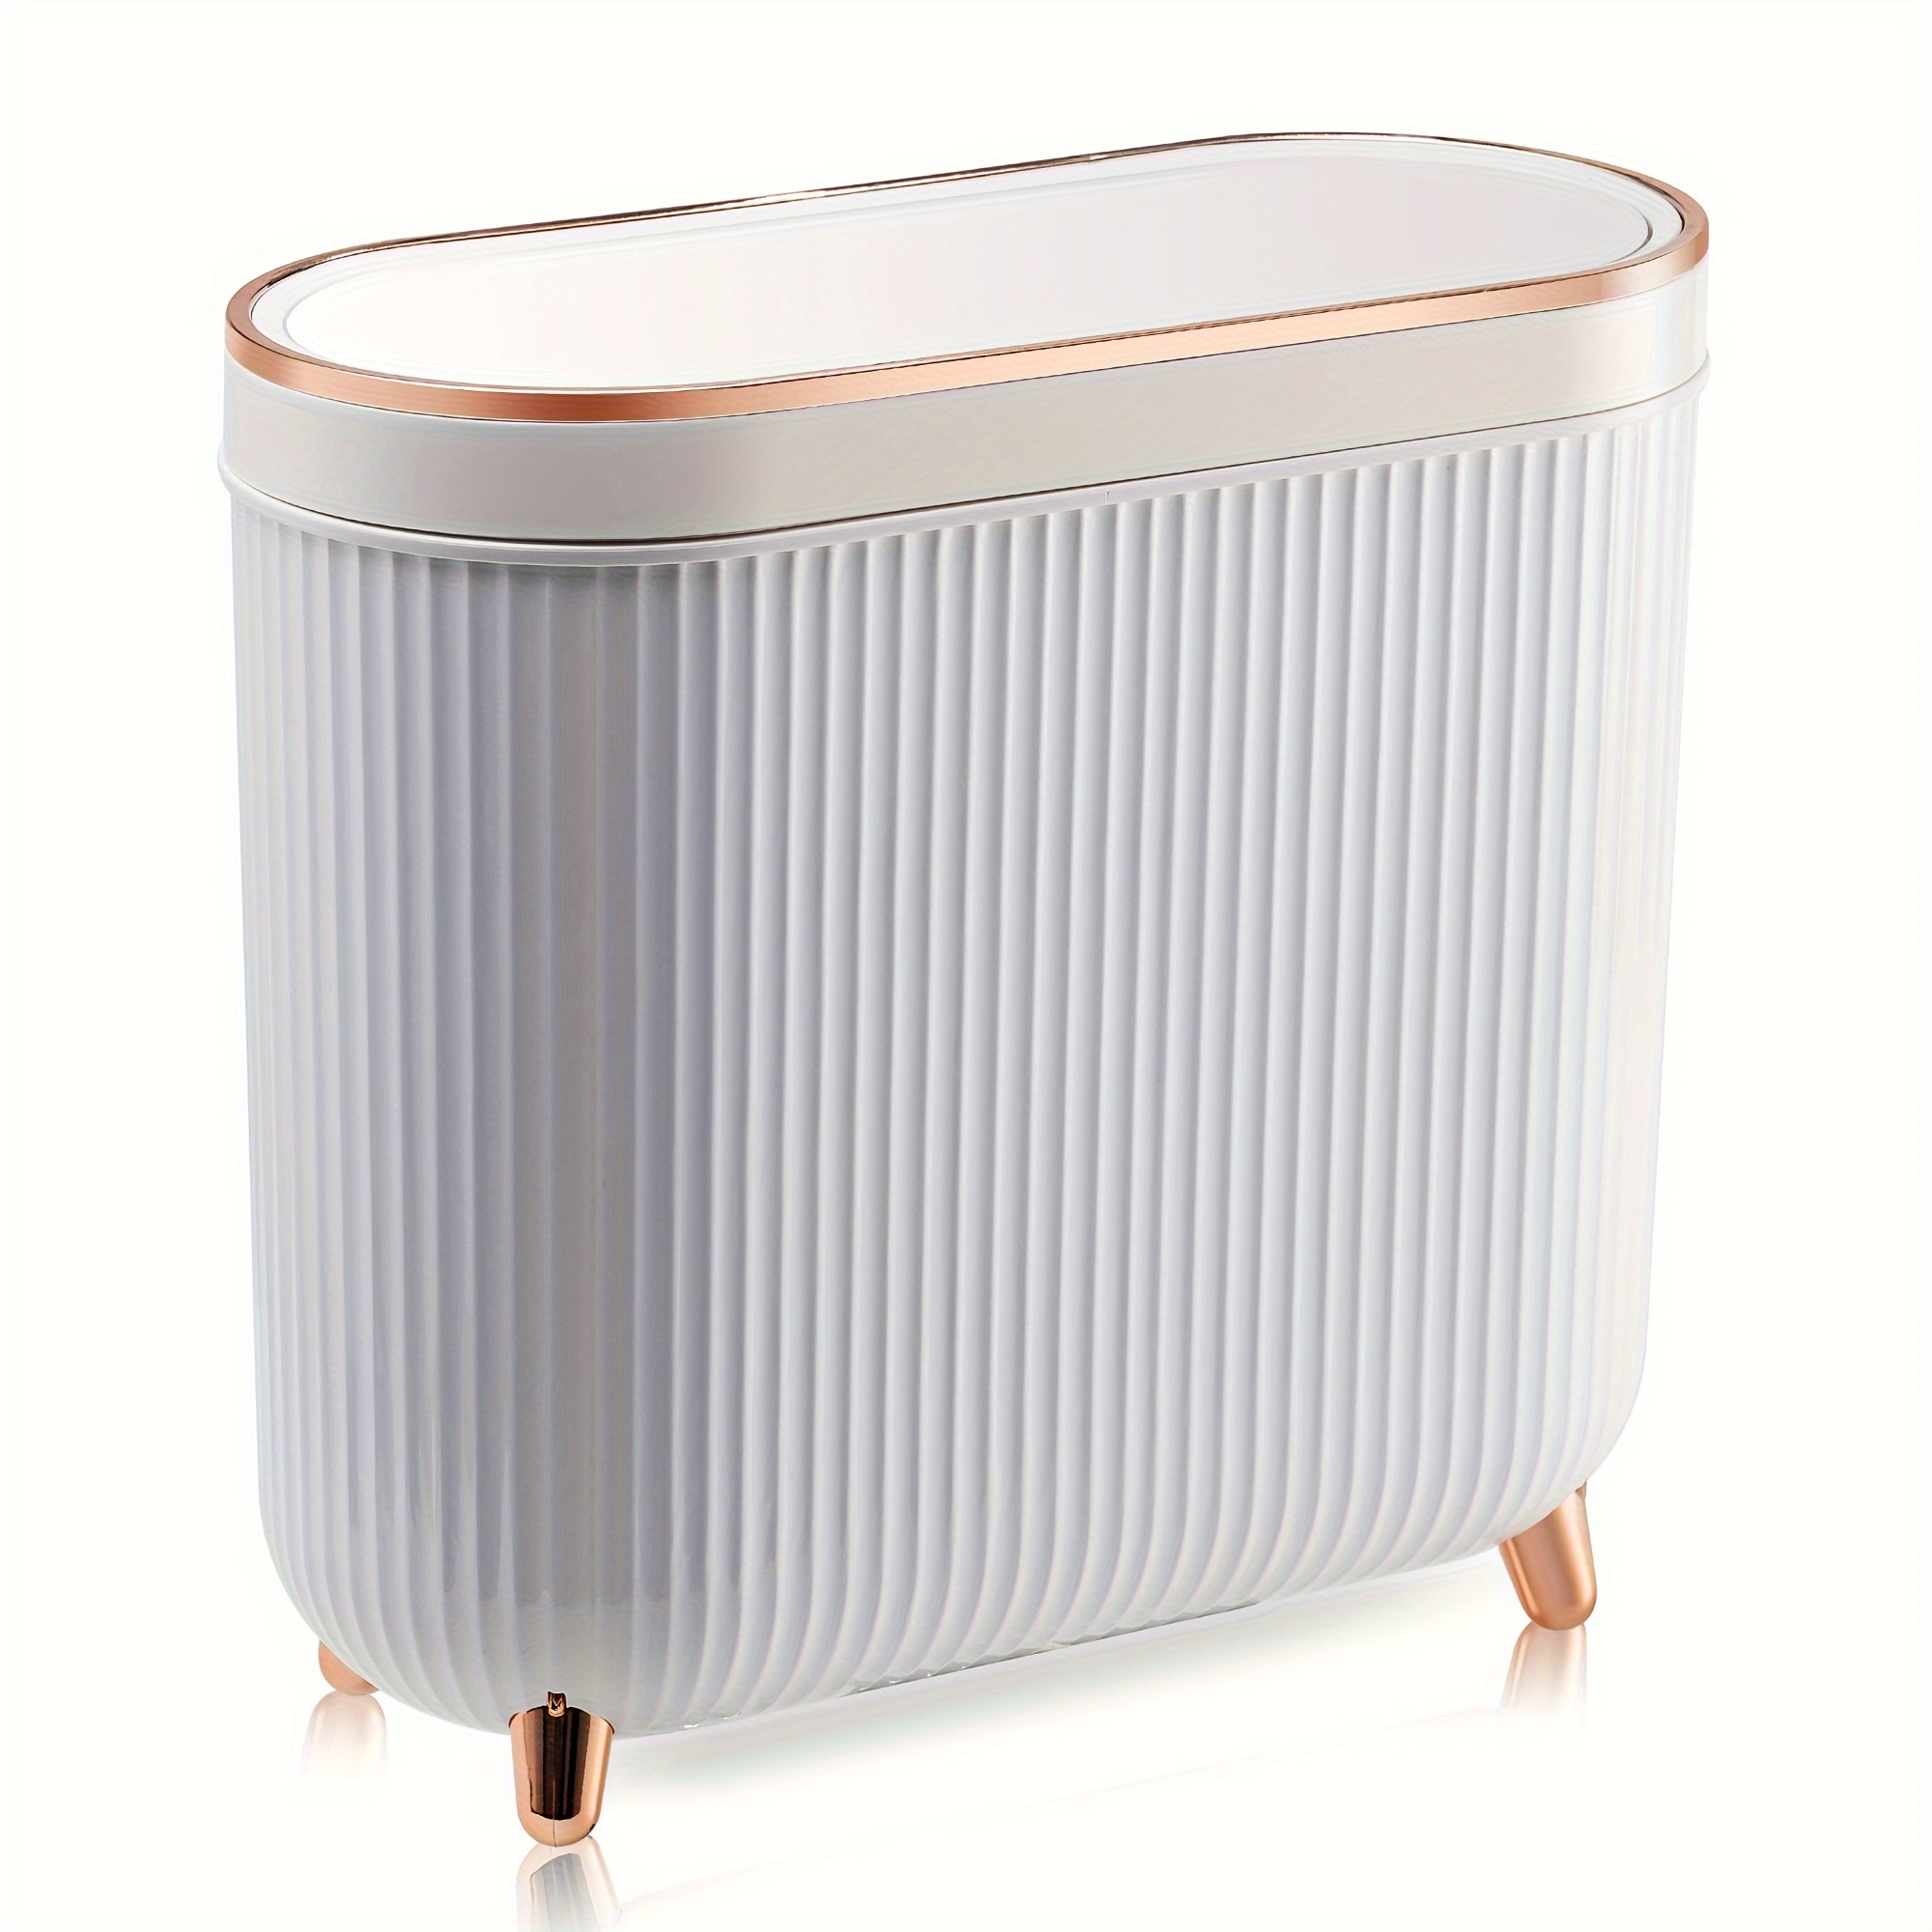 

Bathroom Trash Can With Lid 3.2 Gallon Narrow Trash Can Small Plastic Trash Bin 12 Liter Rectangular Plastic Garbage Can With Press Type Lid For Bedroom Bathroom